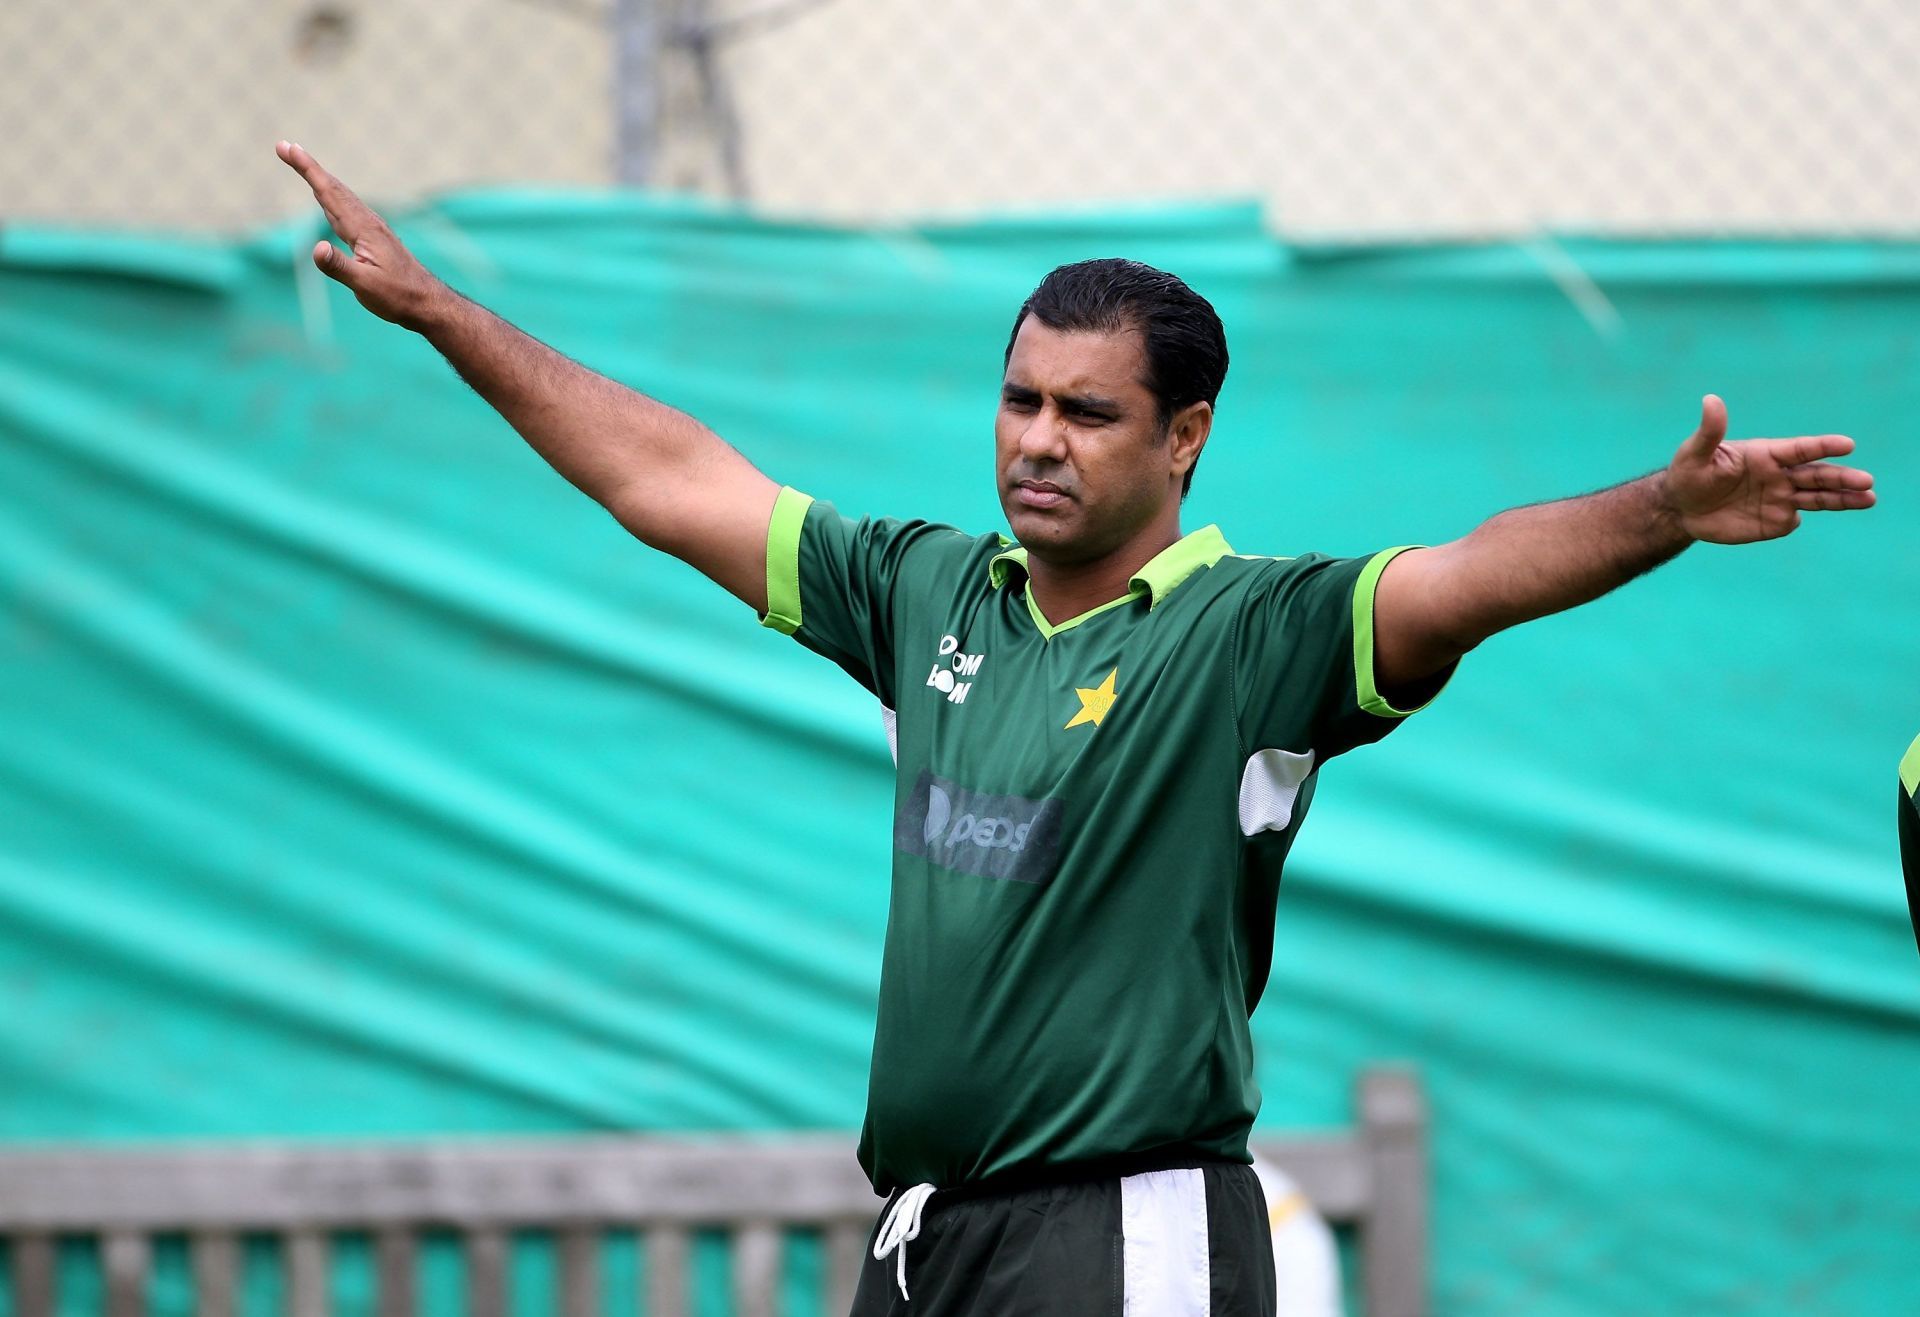 Pakistan seamers like Waqar Younis were known for their reverse swing.